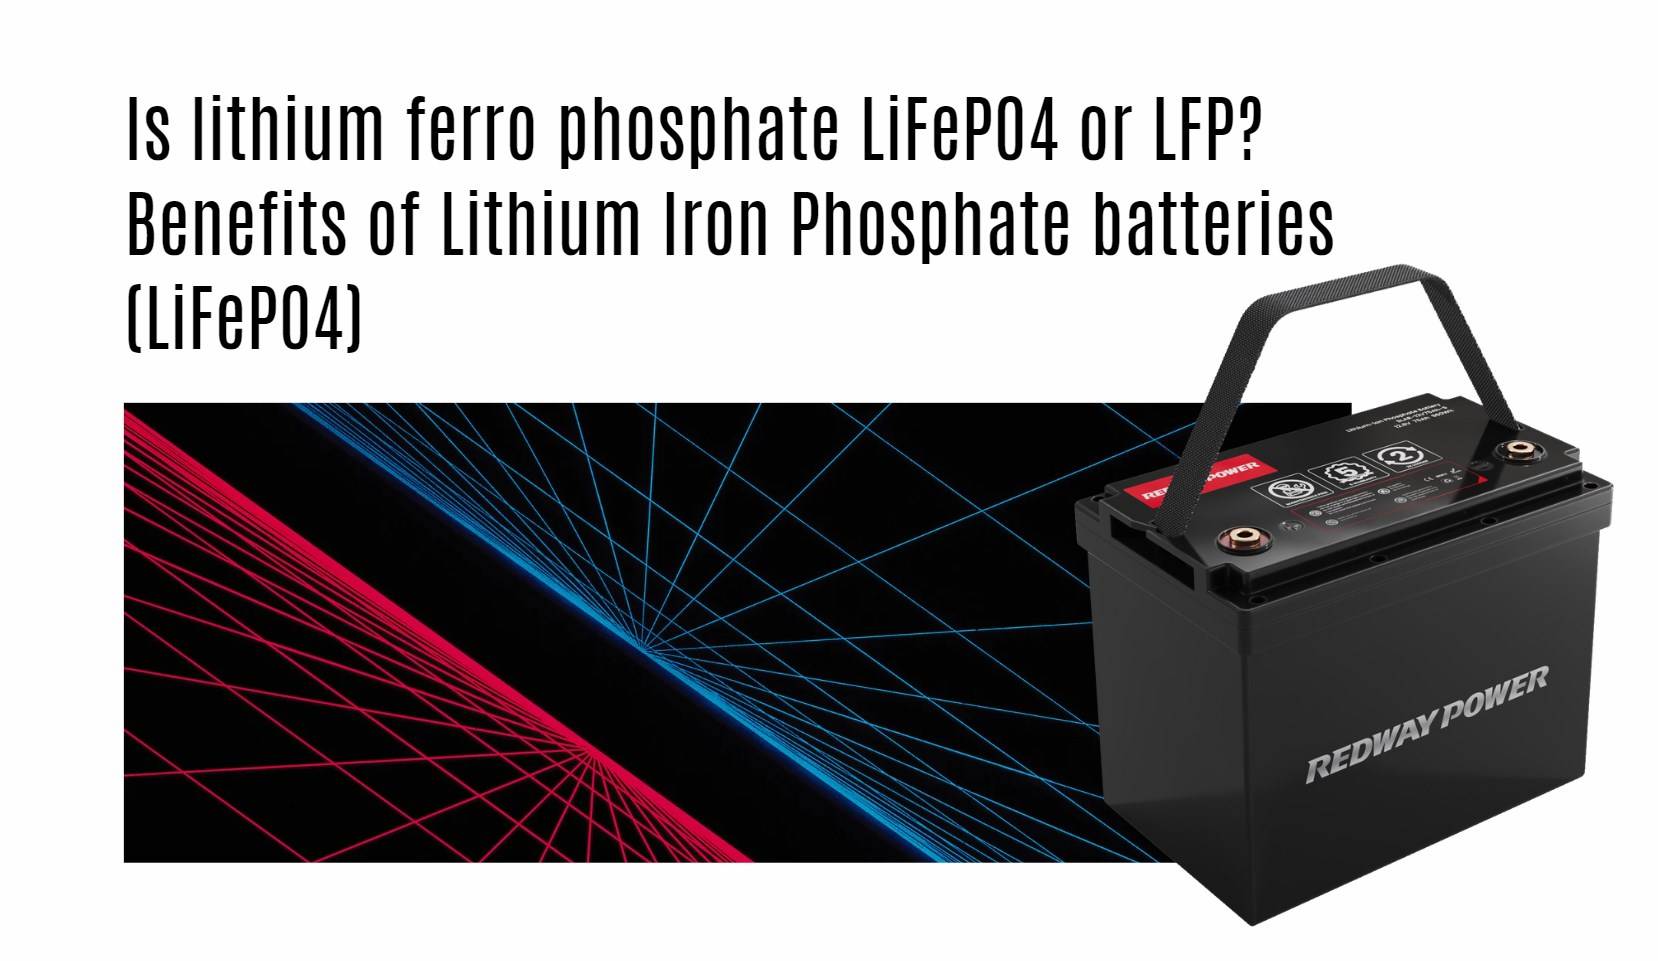 Is lithium ferro phosphate LiFePO4 or LFP? Benefits of Lithium Iron Phosphate batteries (LiFePO4) 12v 100ah rv lithium battery factory oem manufacturer marine boat